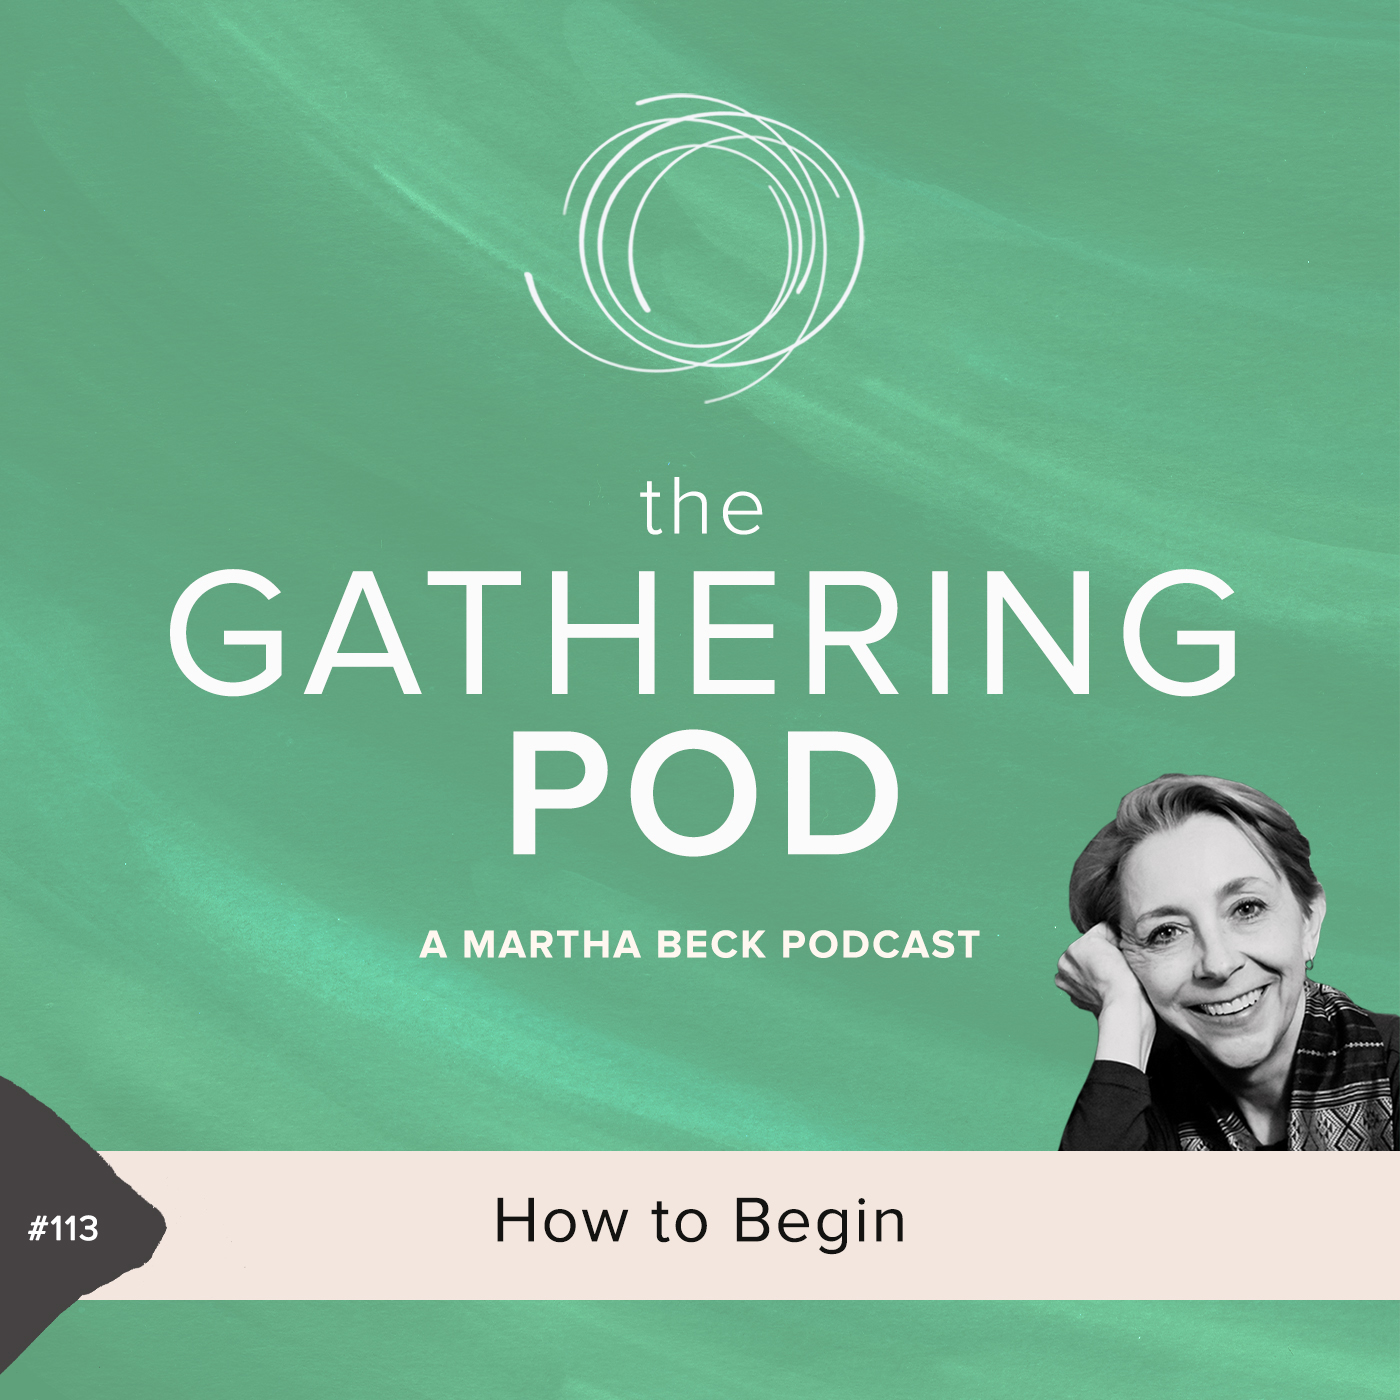 Image for The Gathering Pod A Martha Beck Podcast Episode #113 How to Begin